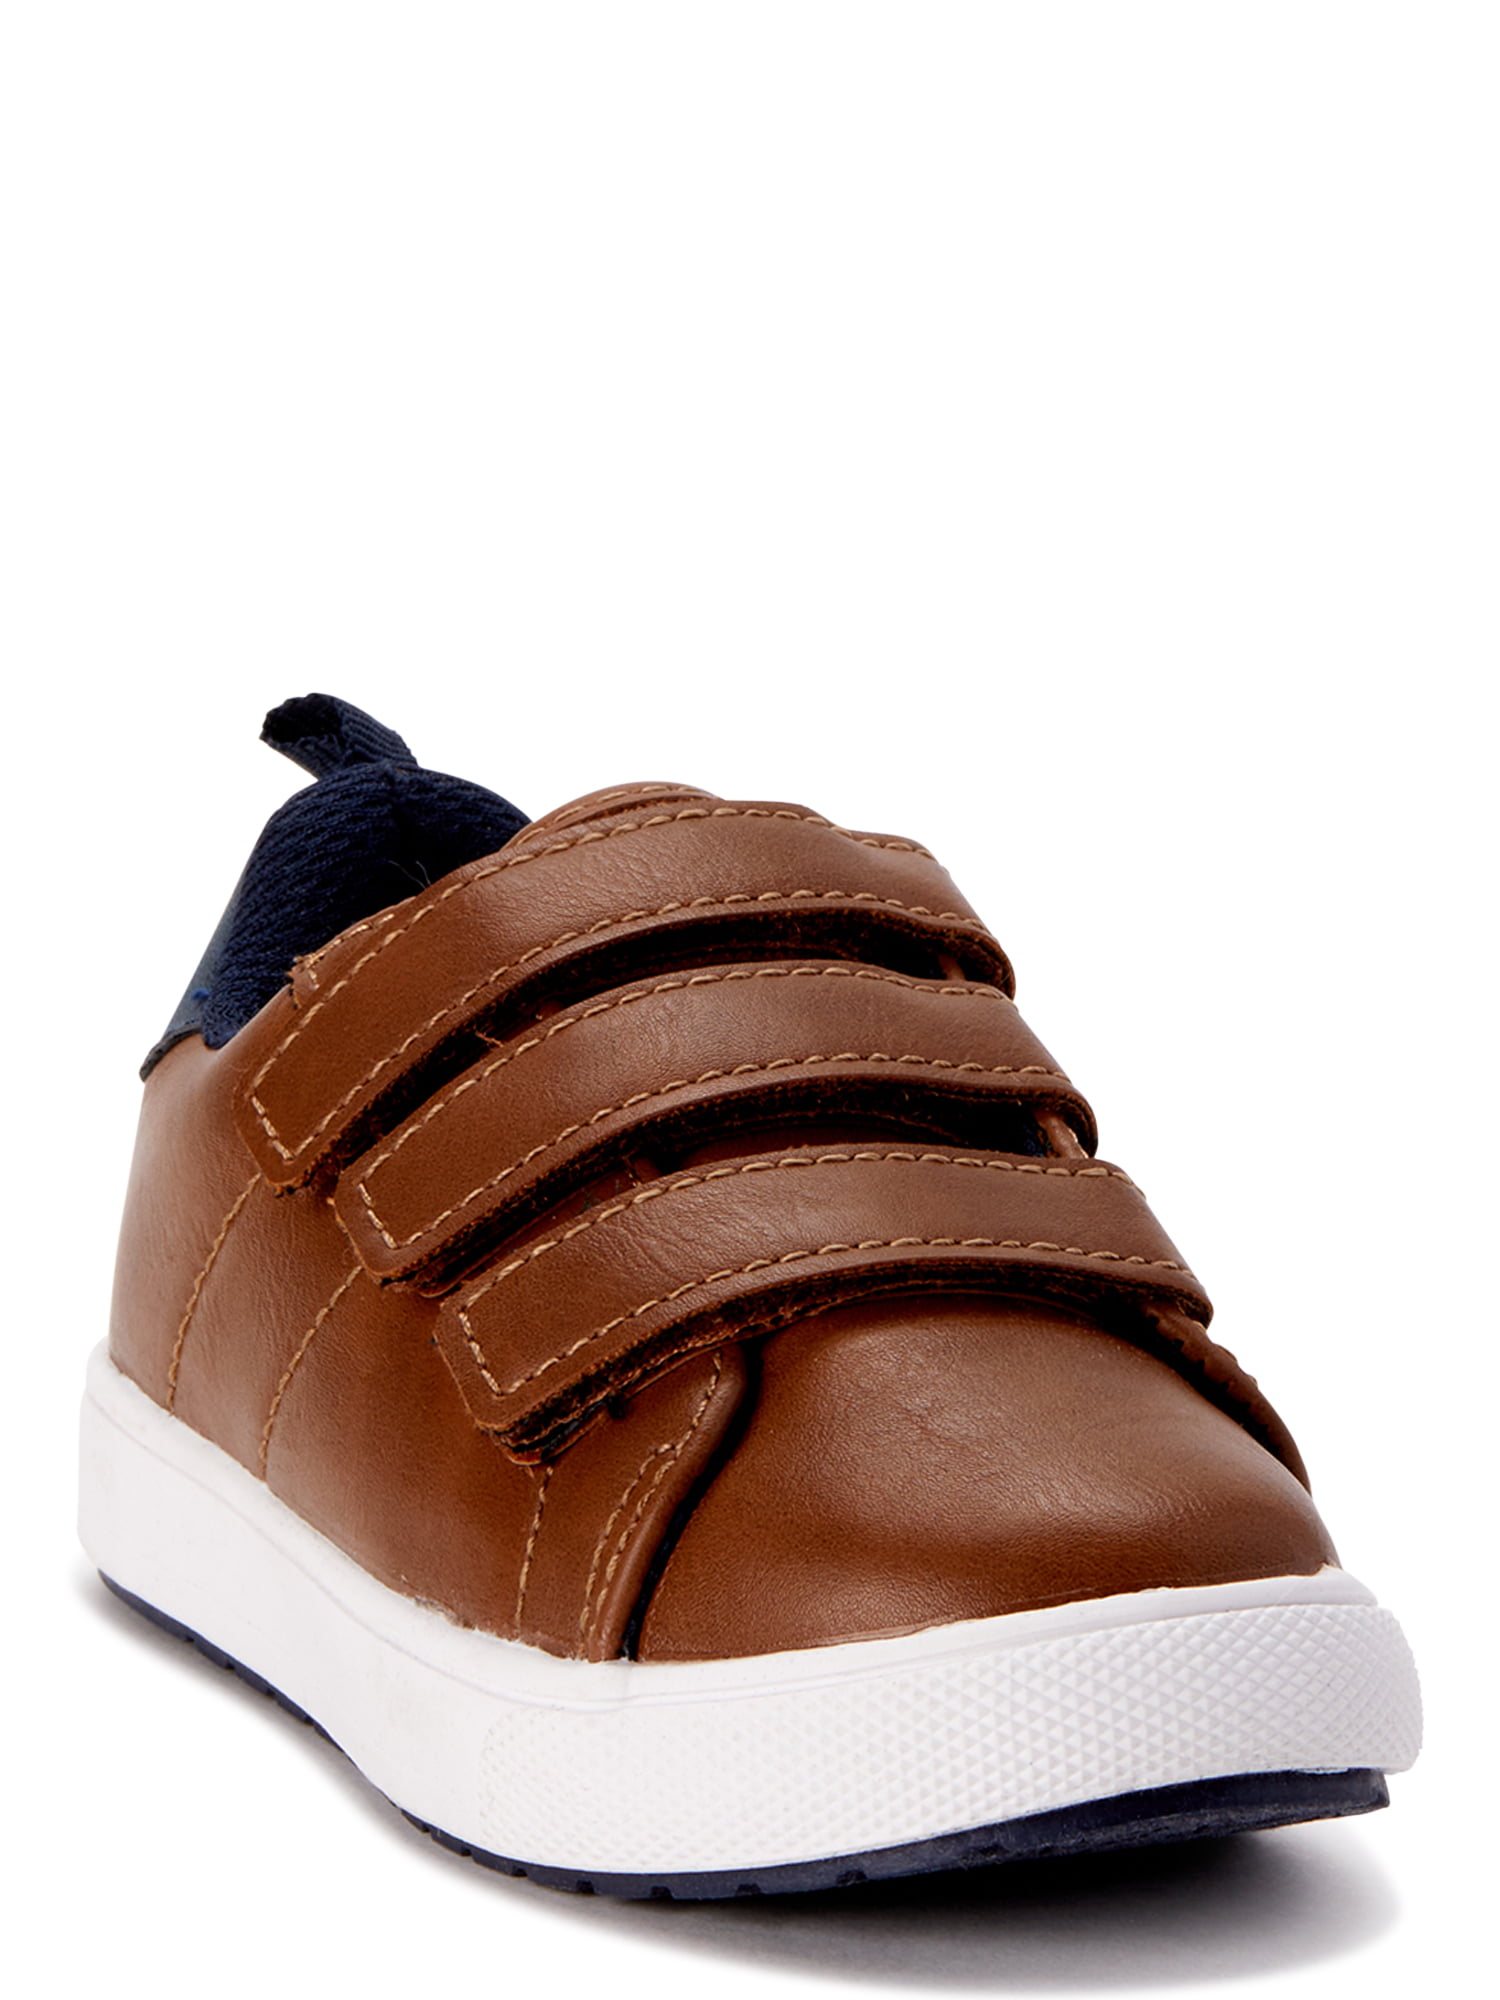 toddler boy casual shoes